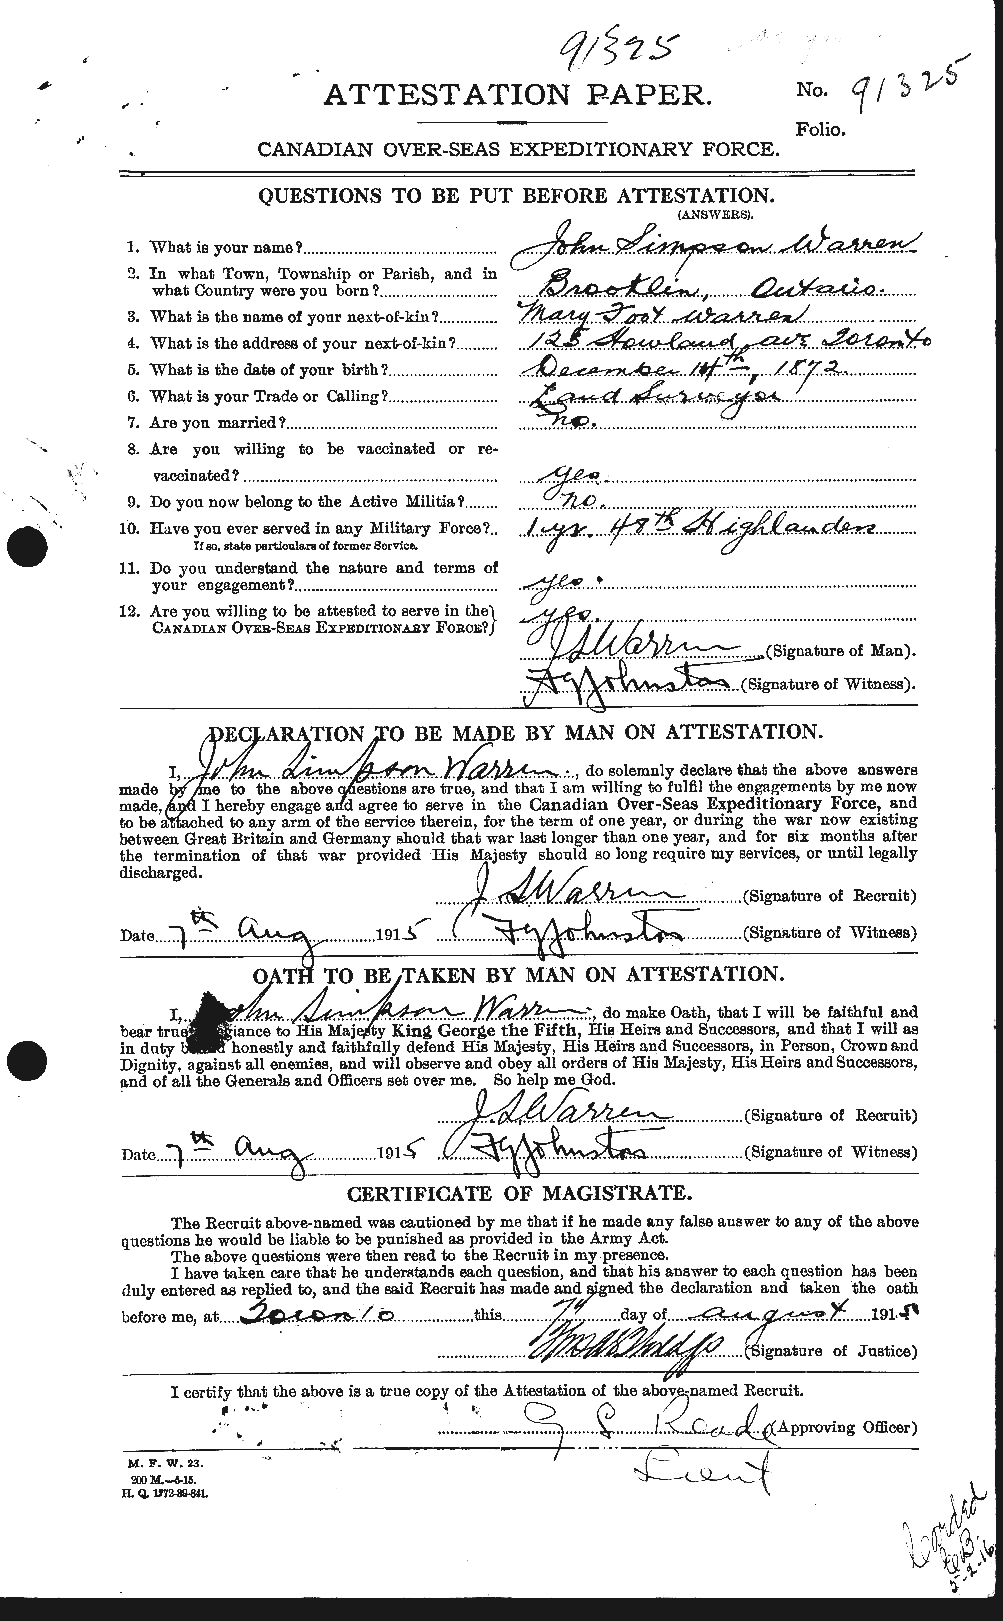 Personnel Records of the First World War - CEF 658560a